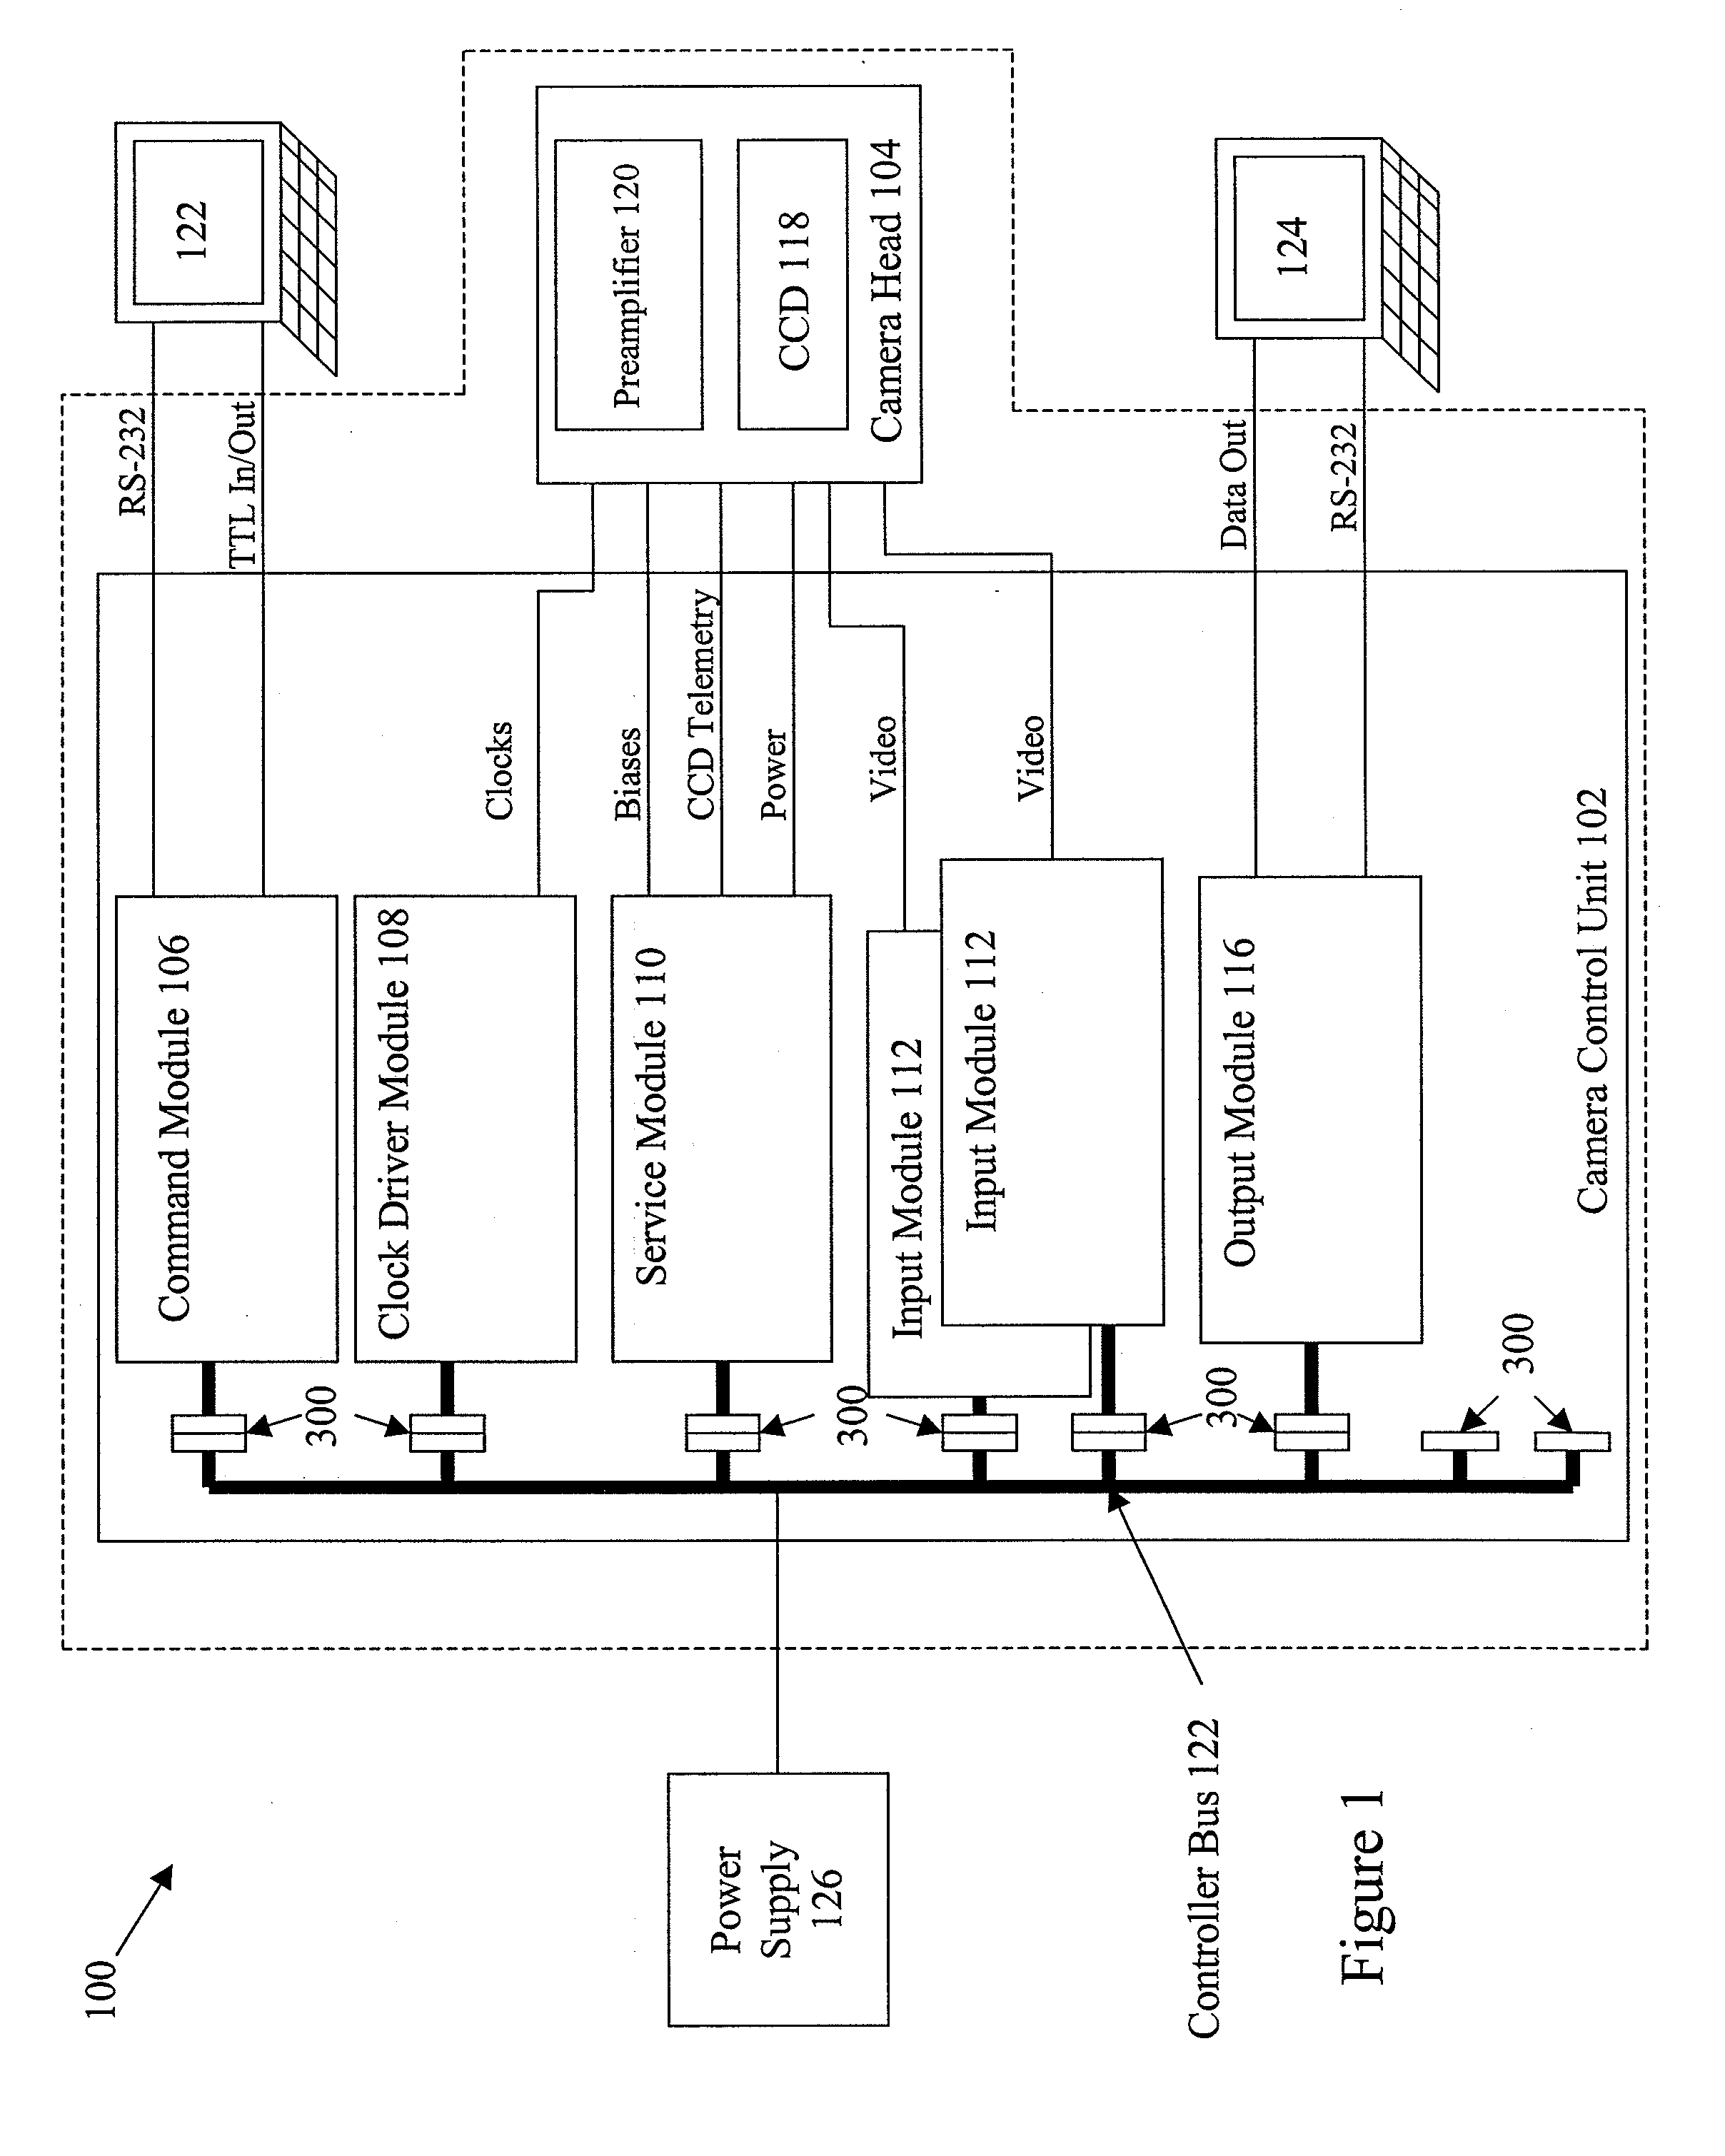 Circuit used in digitizing analog video from an image pixel array